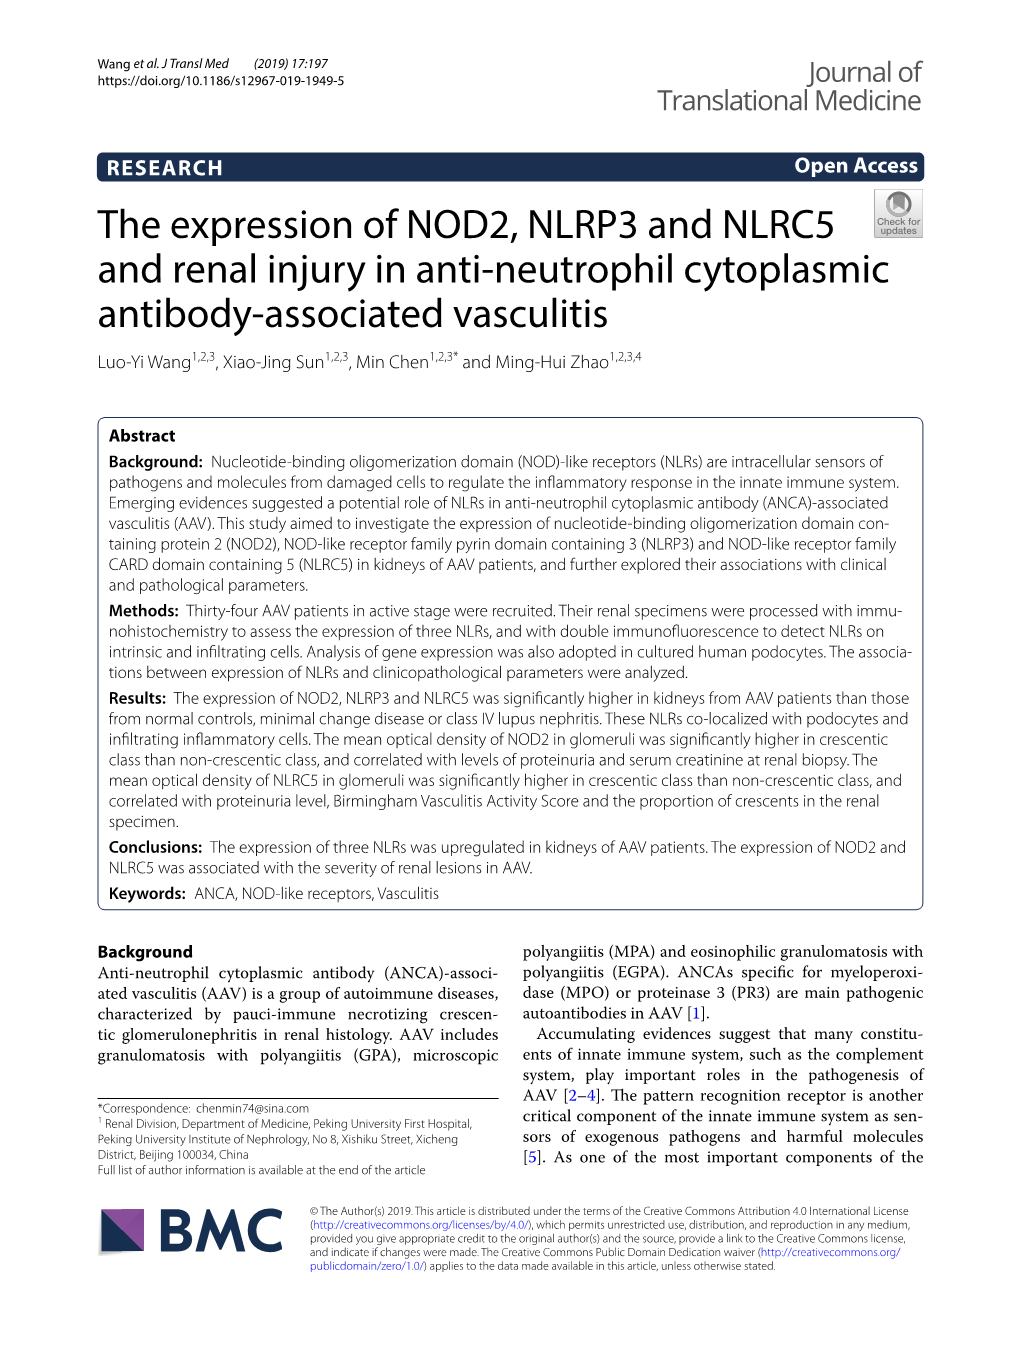 The Expression of NOD2, NLRP3 and NLRC5 and Renal Injury in Anti-Neutrophil Cytoplasmic Antibody-Associated Vasculitis